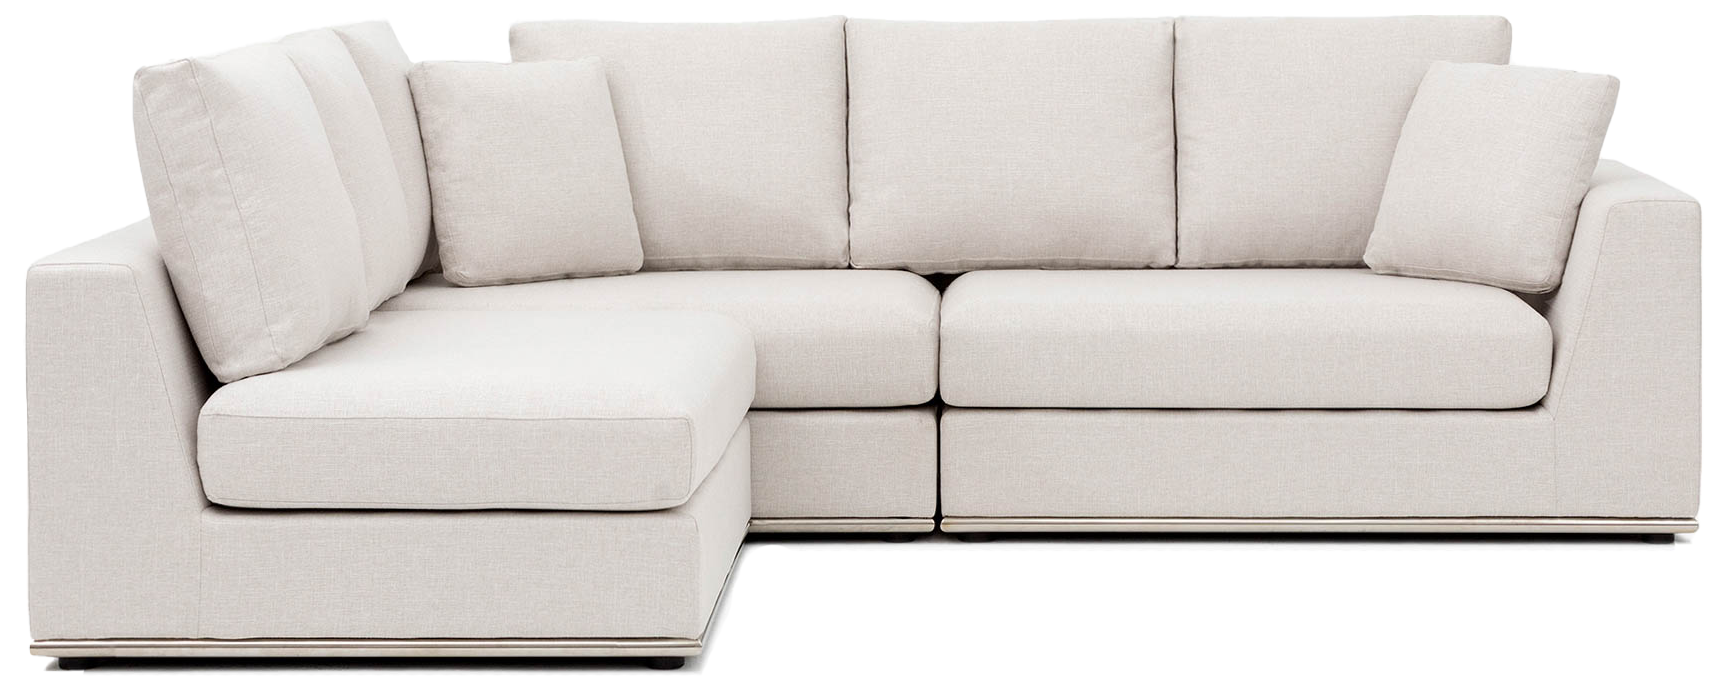 Cream fabric sectional couch